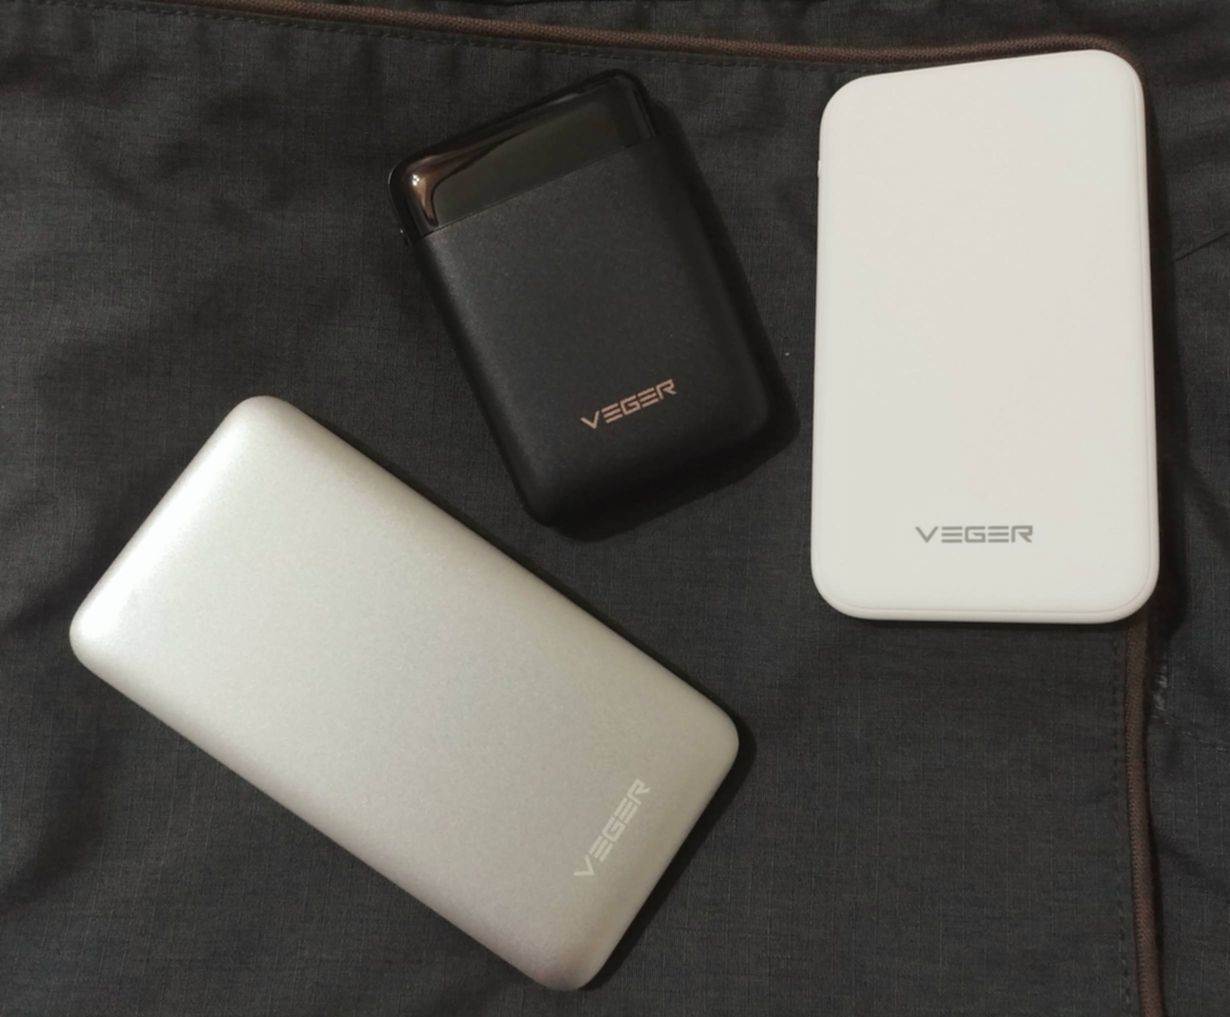 Veger power banks are my reliable travel companions